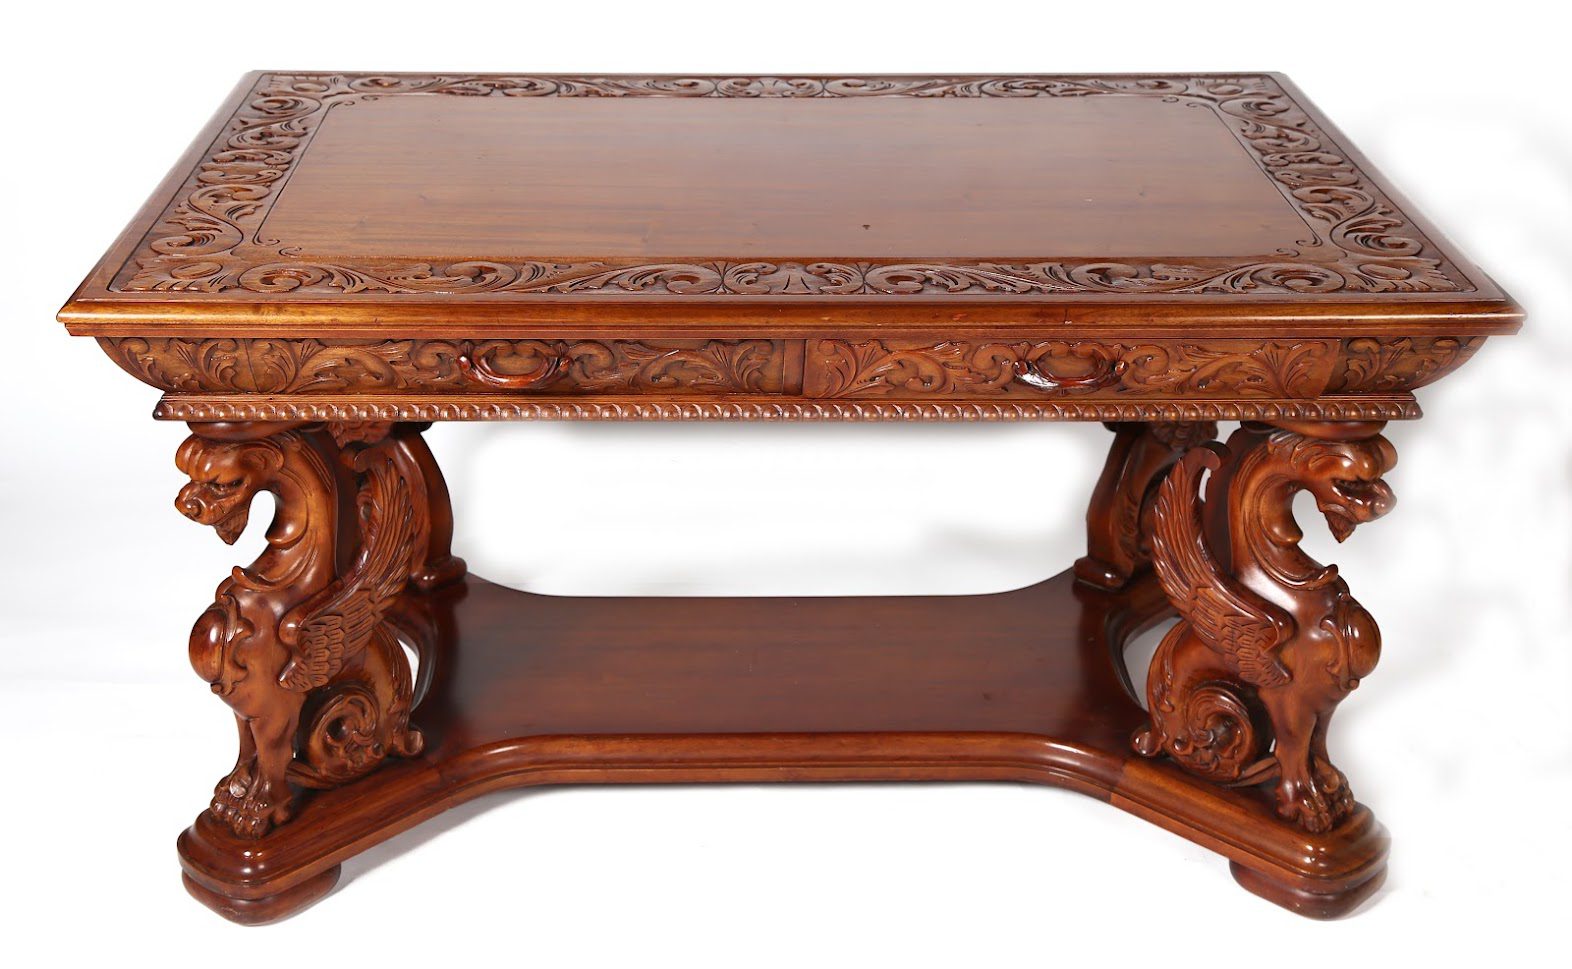 A wooden table with carved designs on it.